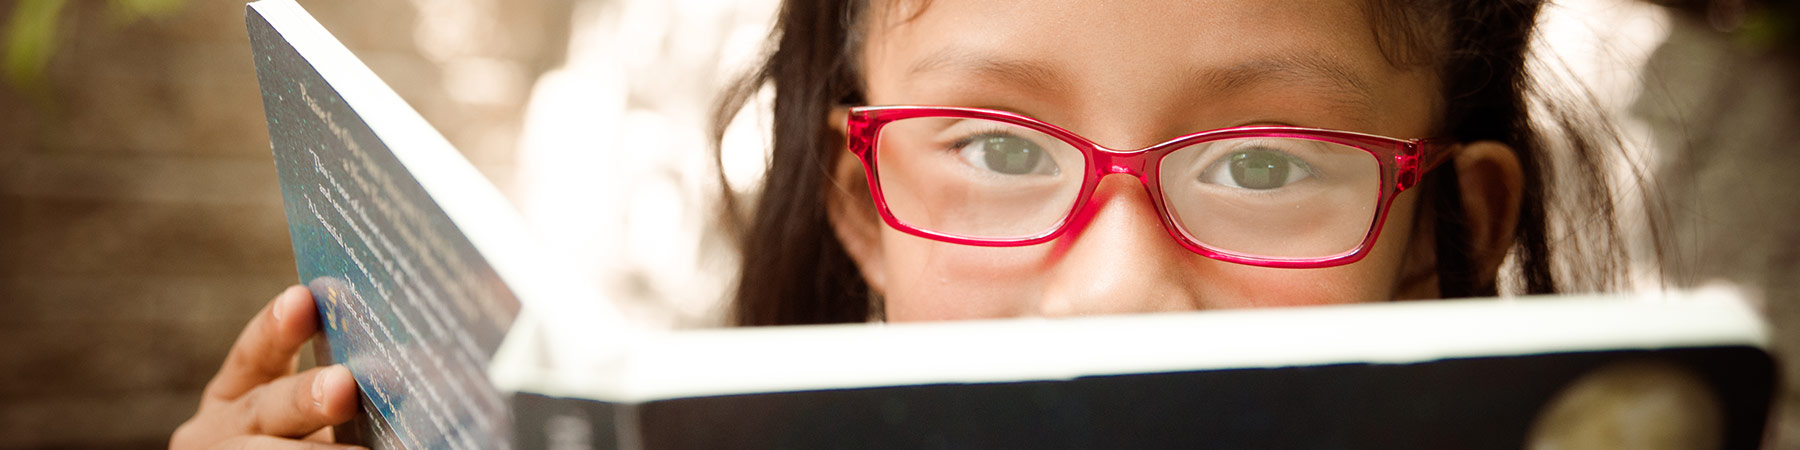 a child with red glasses peering over the top of a book